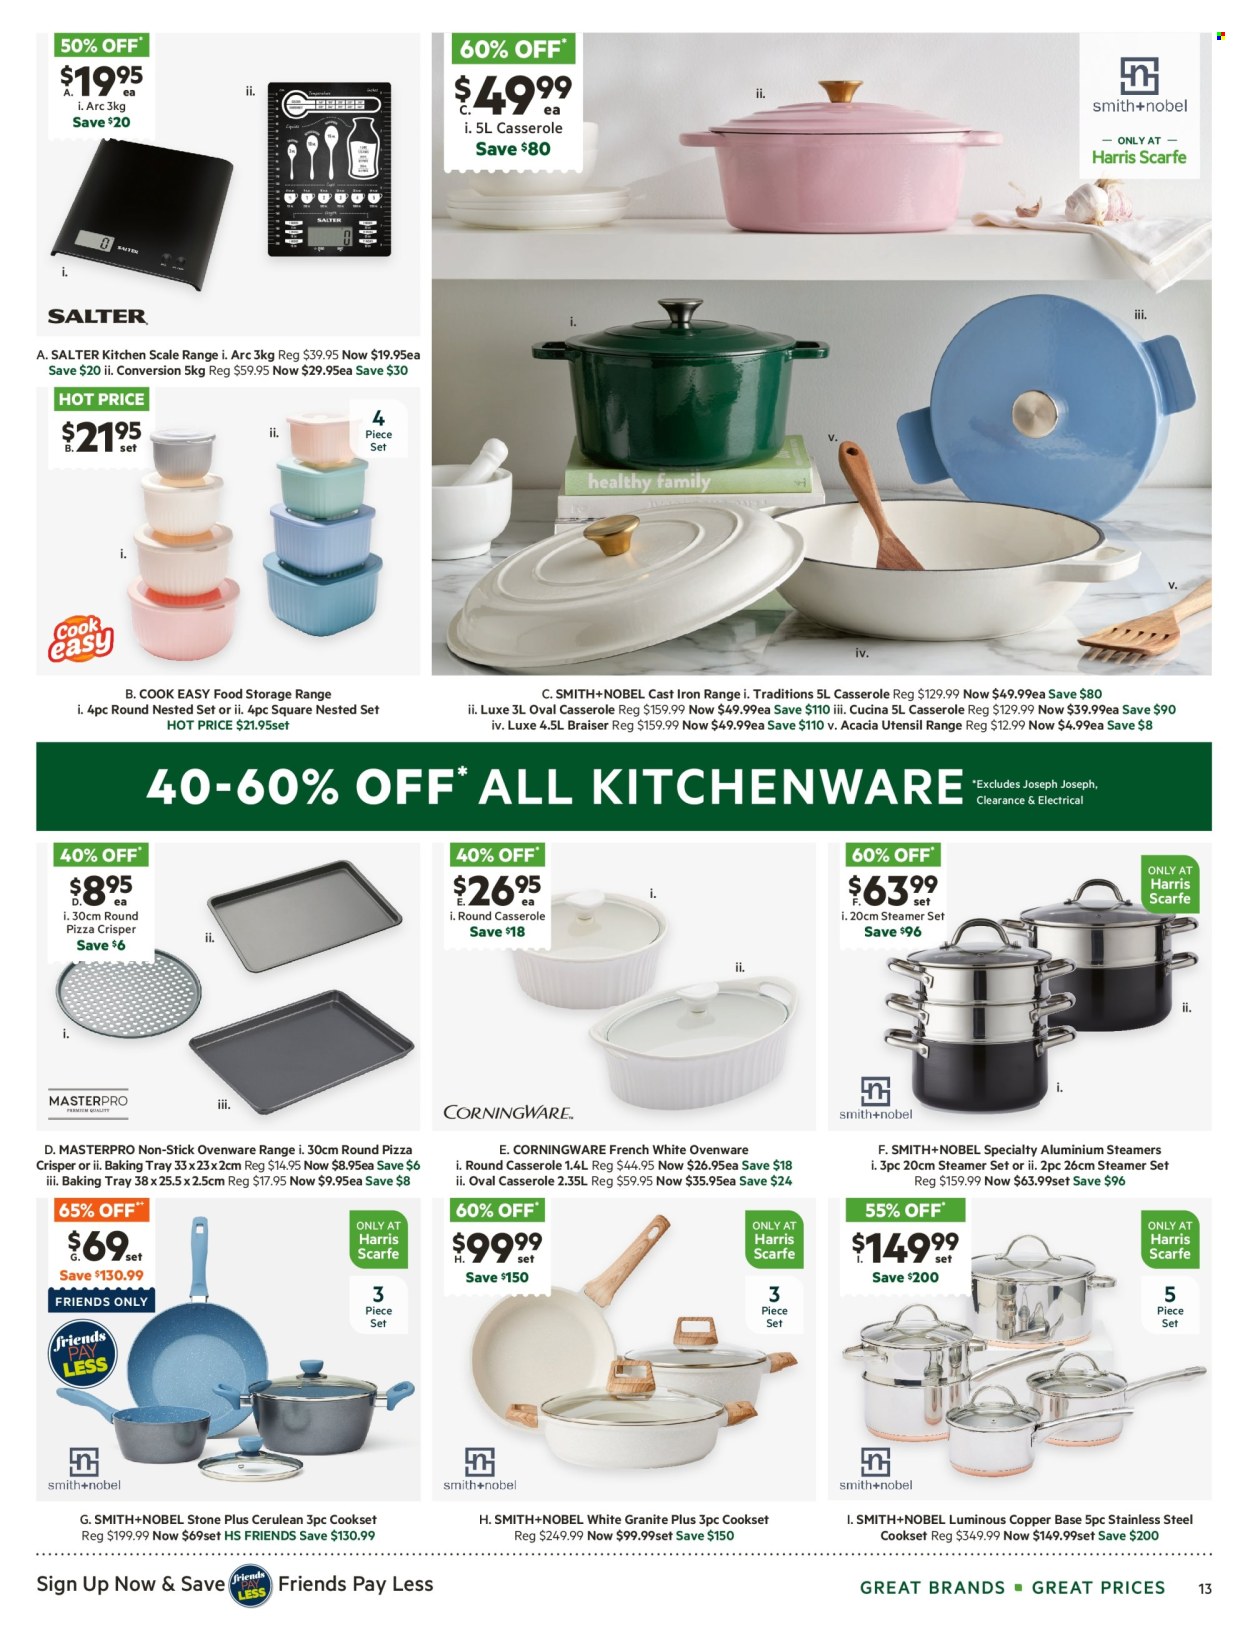 thumbnail - Harris Scarfe Catalogue - Sales products - scale, tray, utensils, casserole, baking tray, kitchen scale, Smith+Nobel, kitchenware, meal box. Page 13.